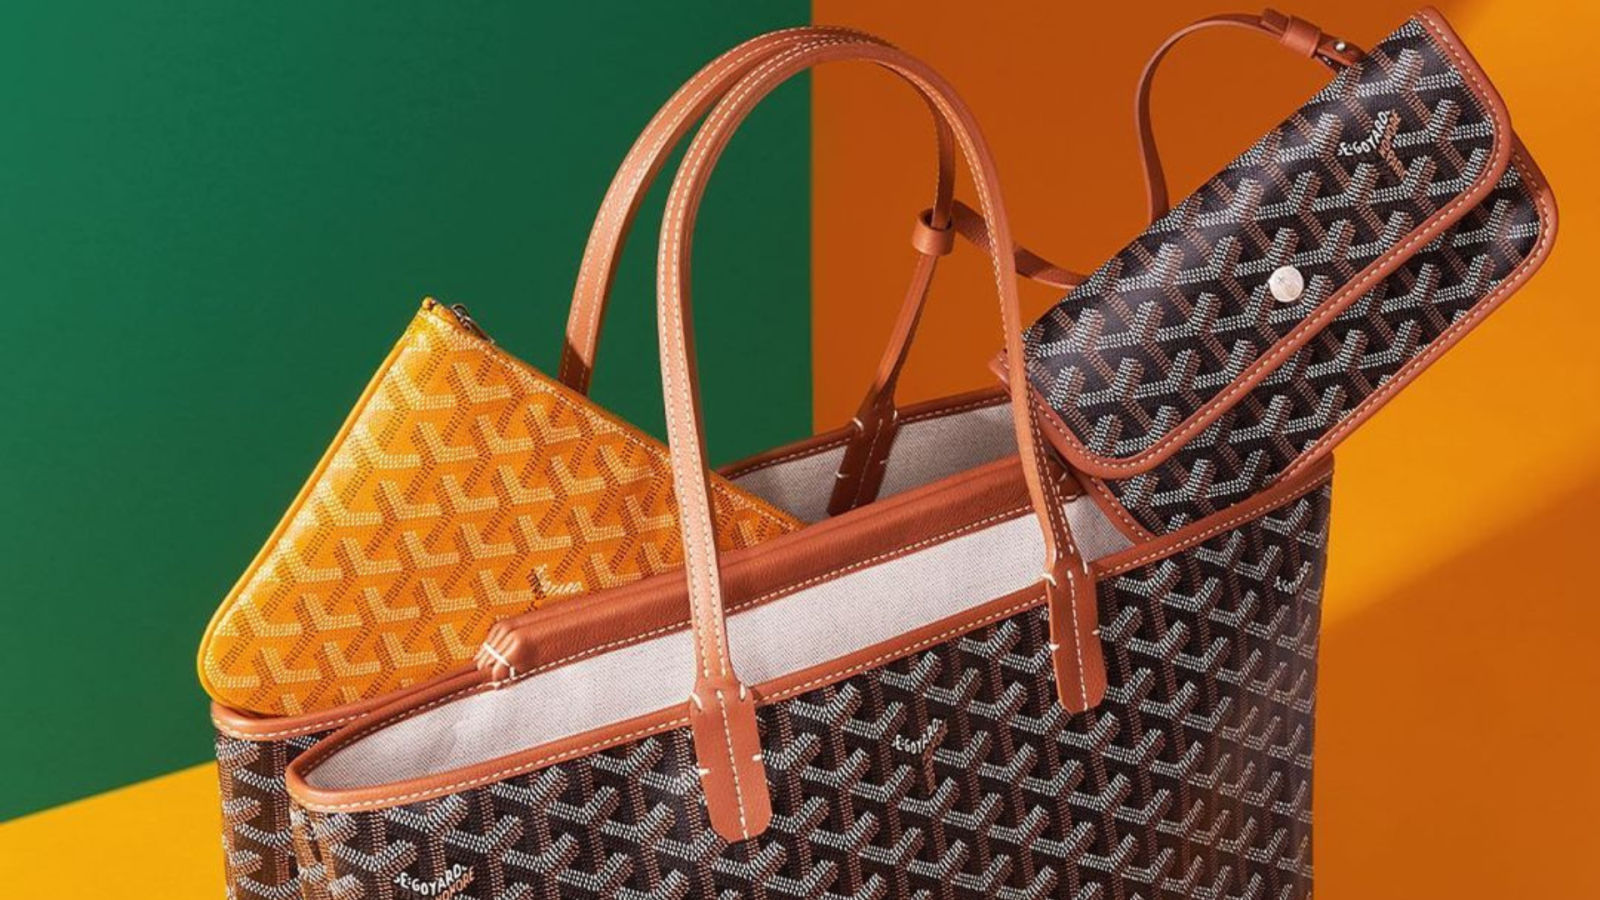 Why Goyard Remains Fashion's Most Mysterious Luxury Brand